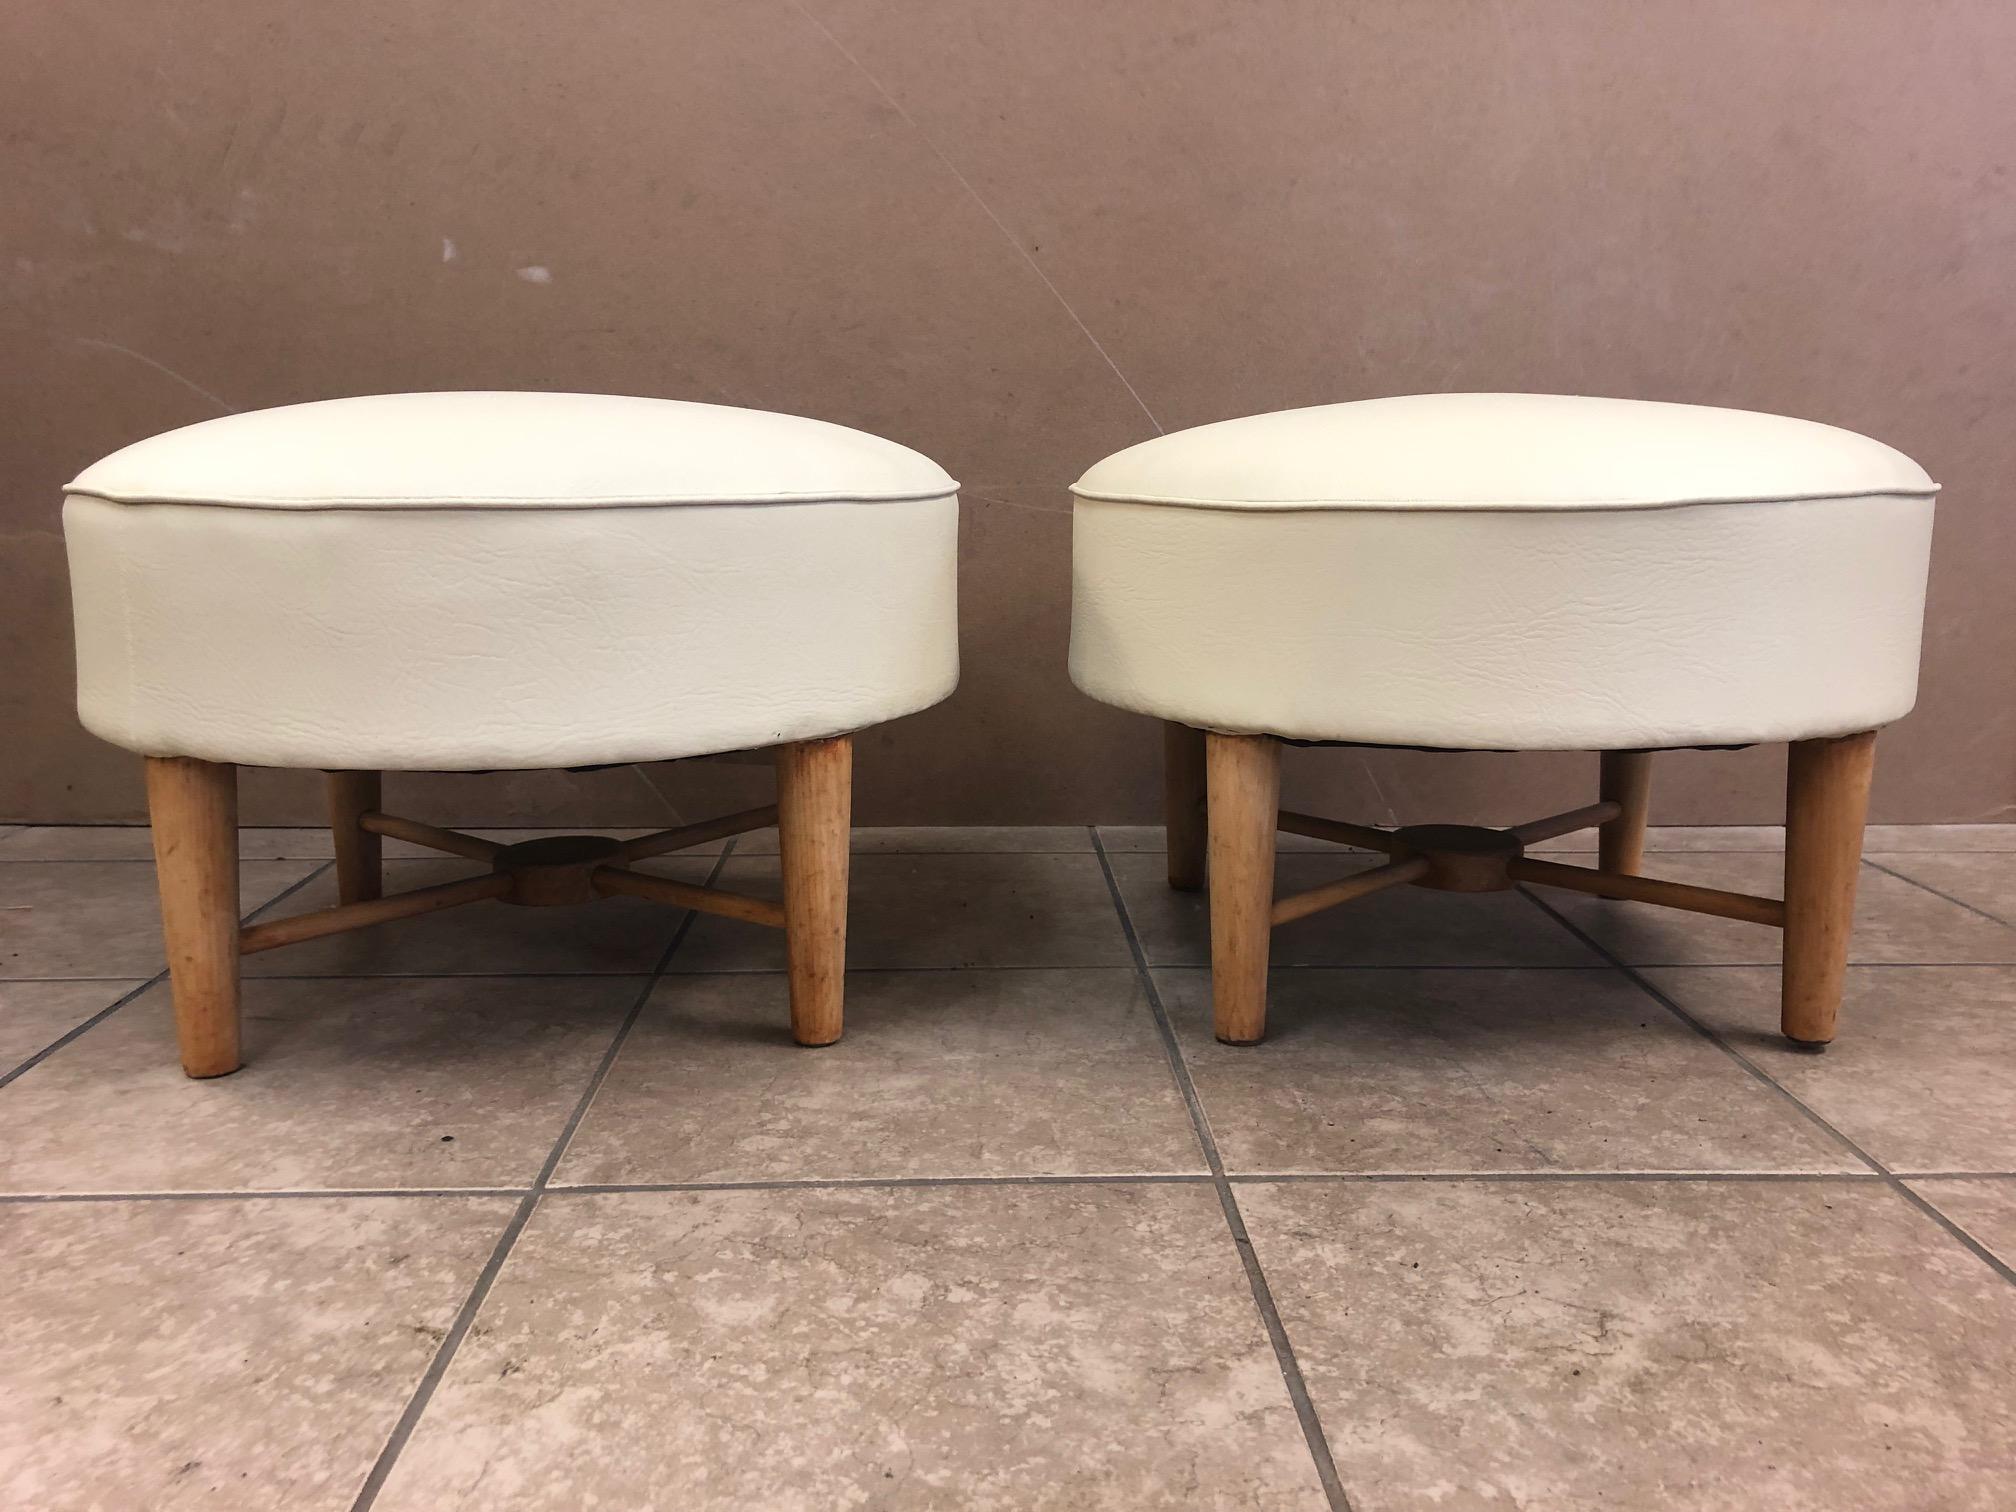 Pair of 1950s, French ottomans. Has a wood X base. Upholstered in leatherette.